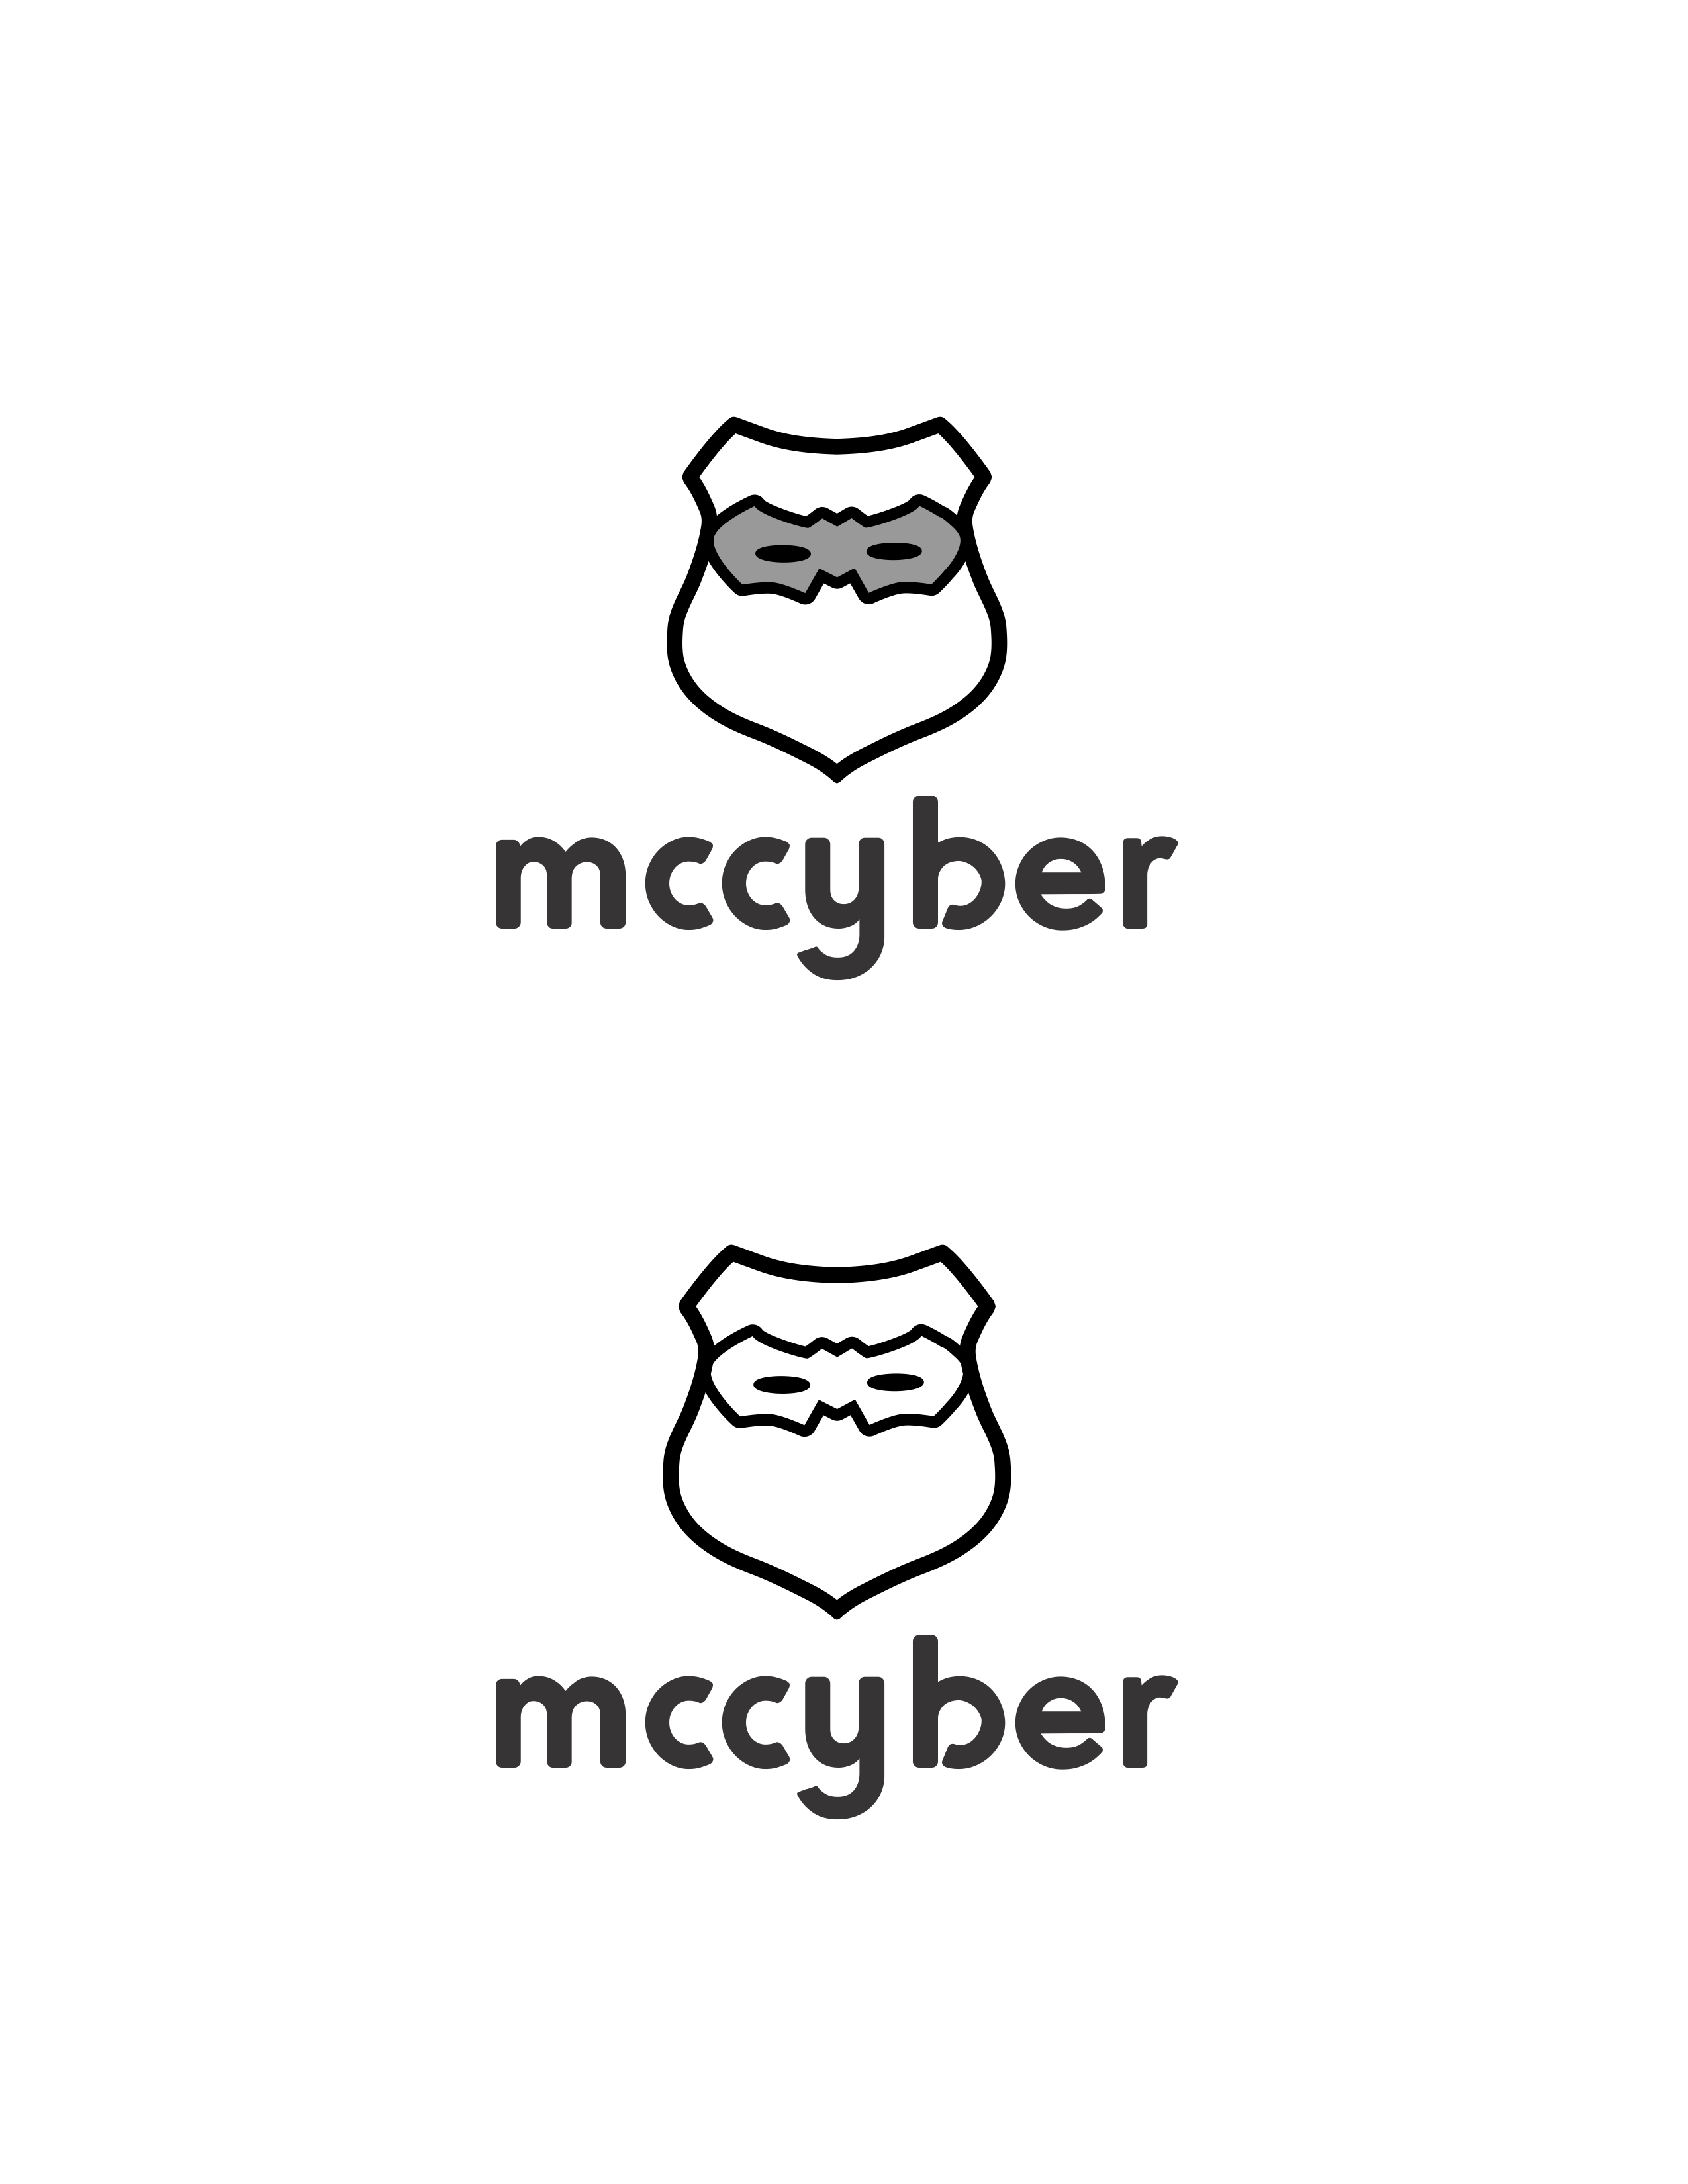 mccyber1.png